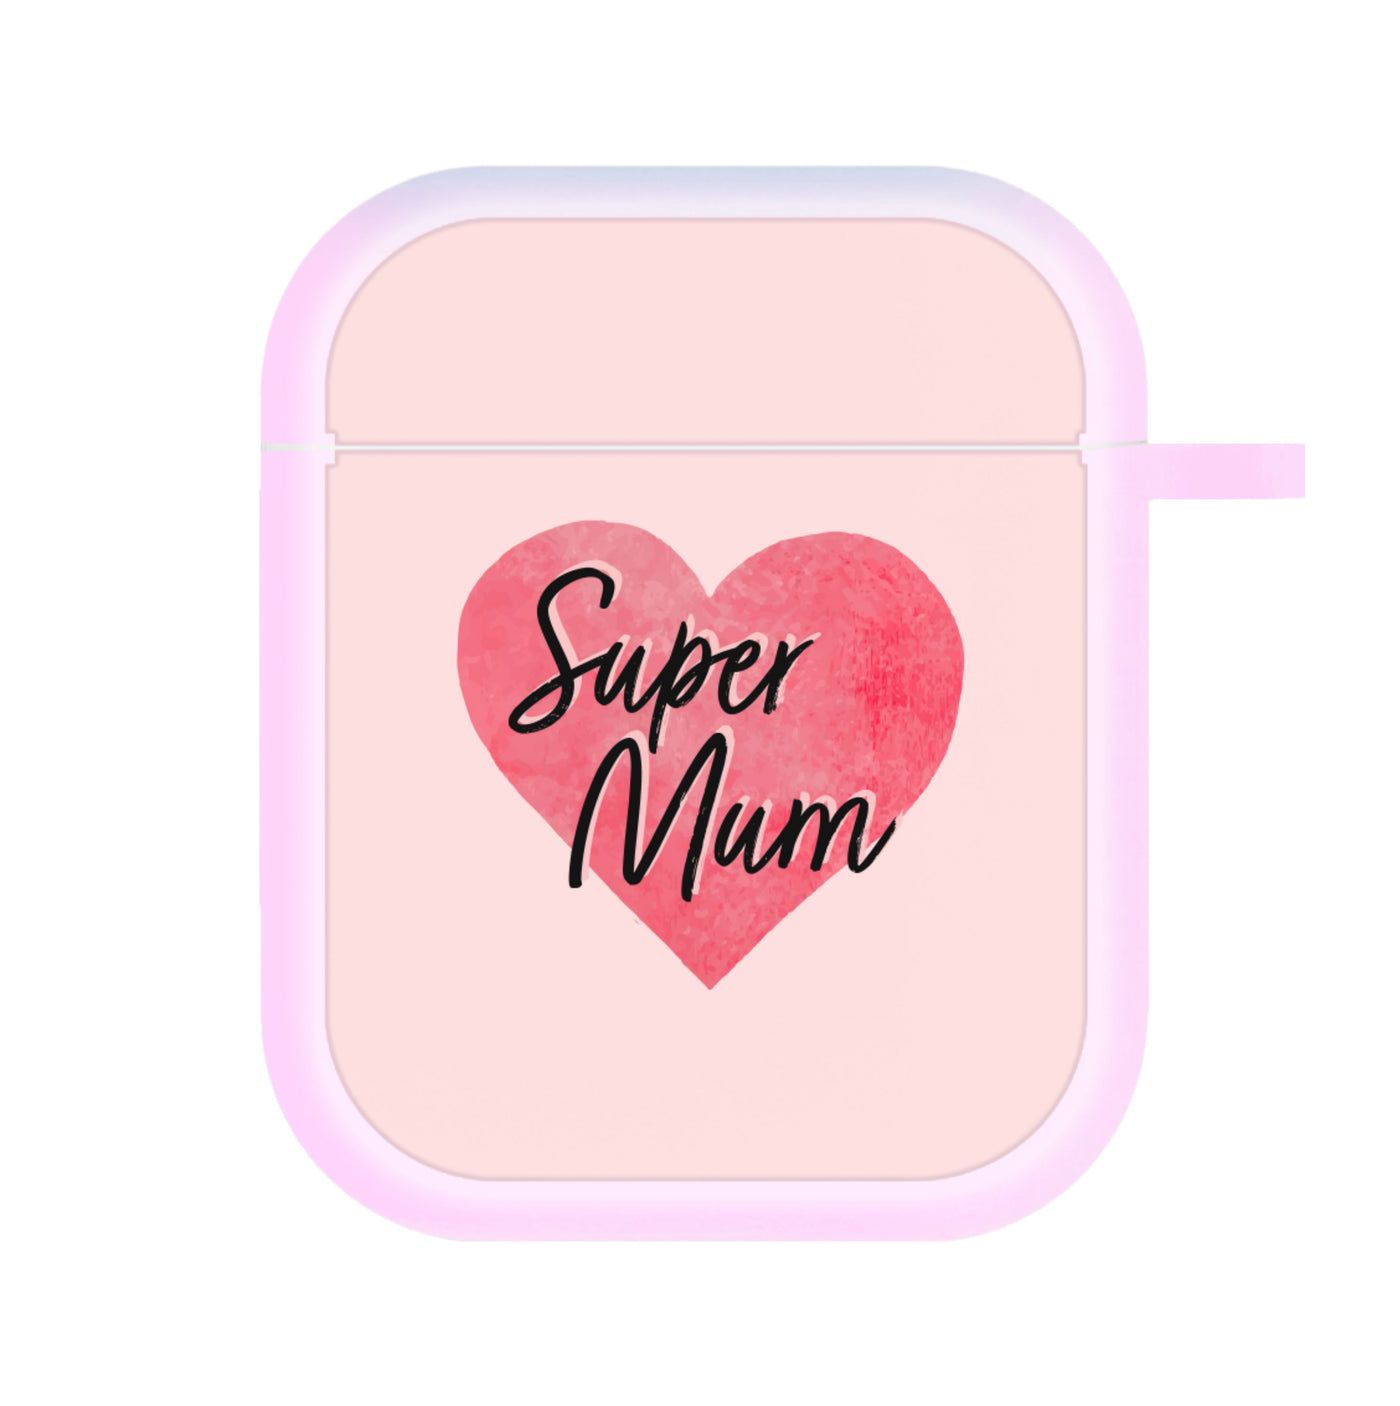 Super Mum - Mother's Day AirPods Case